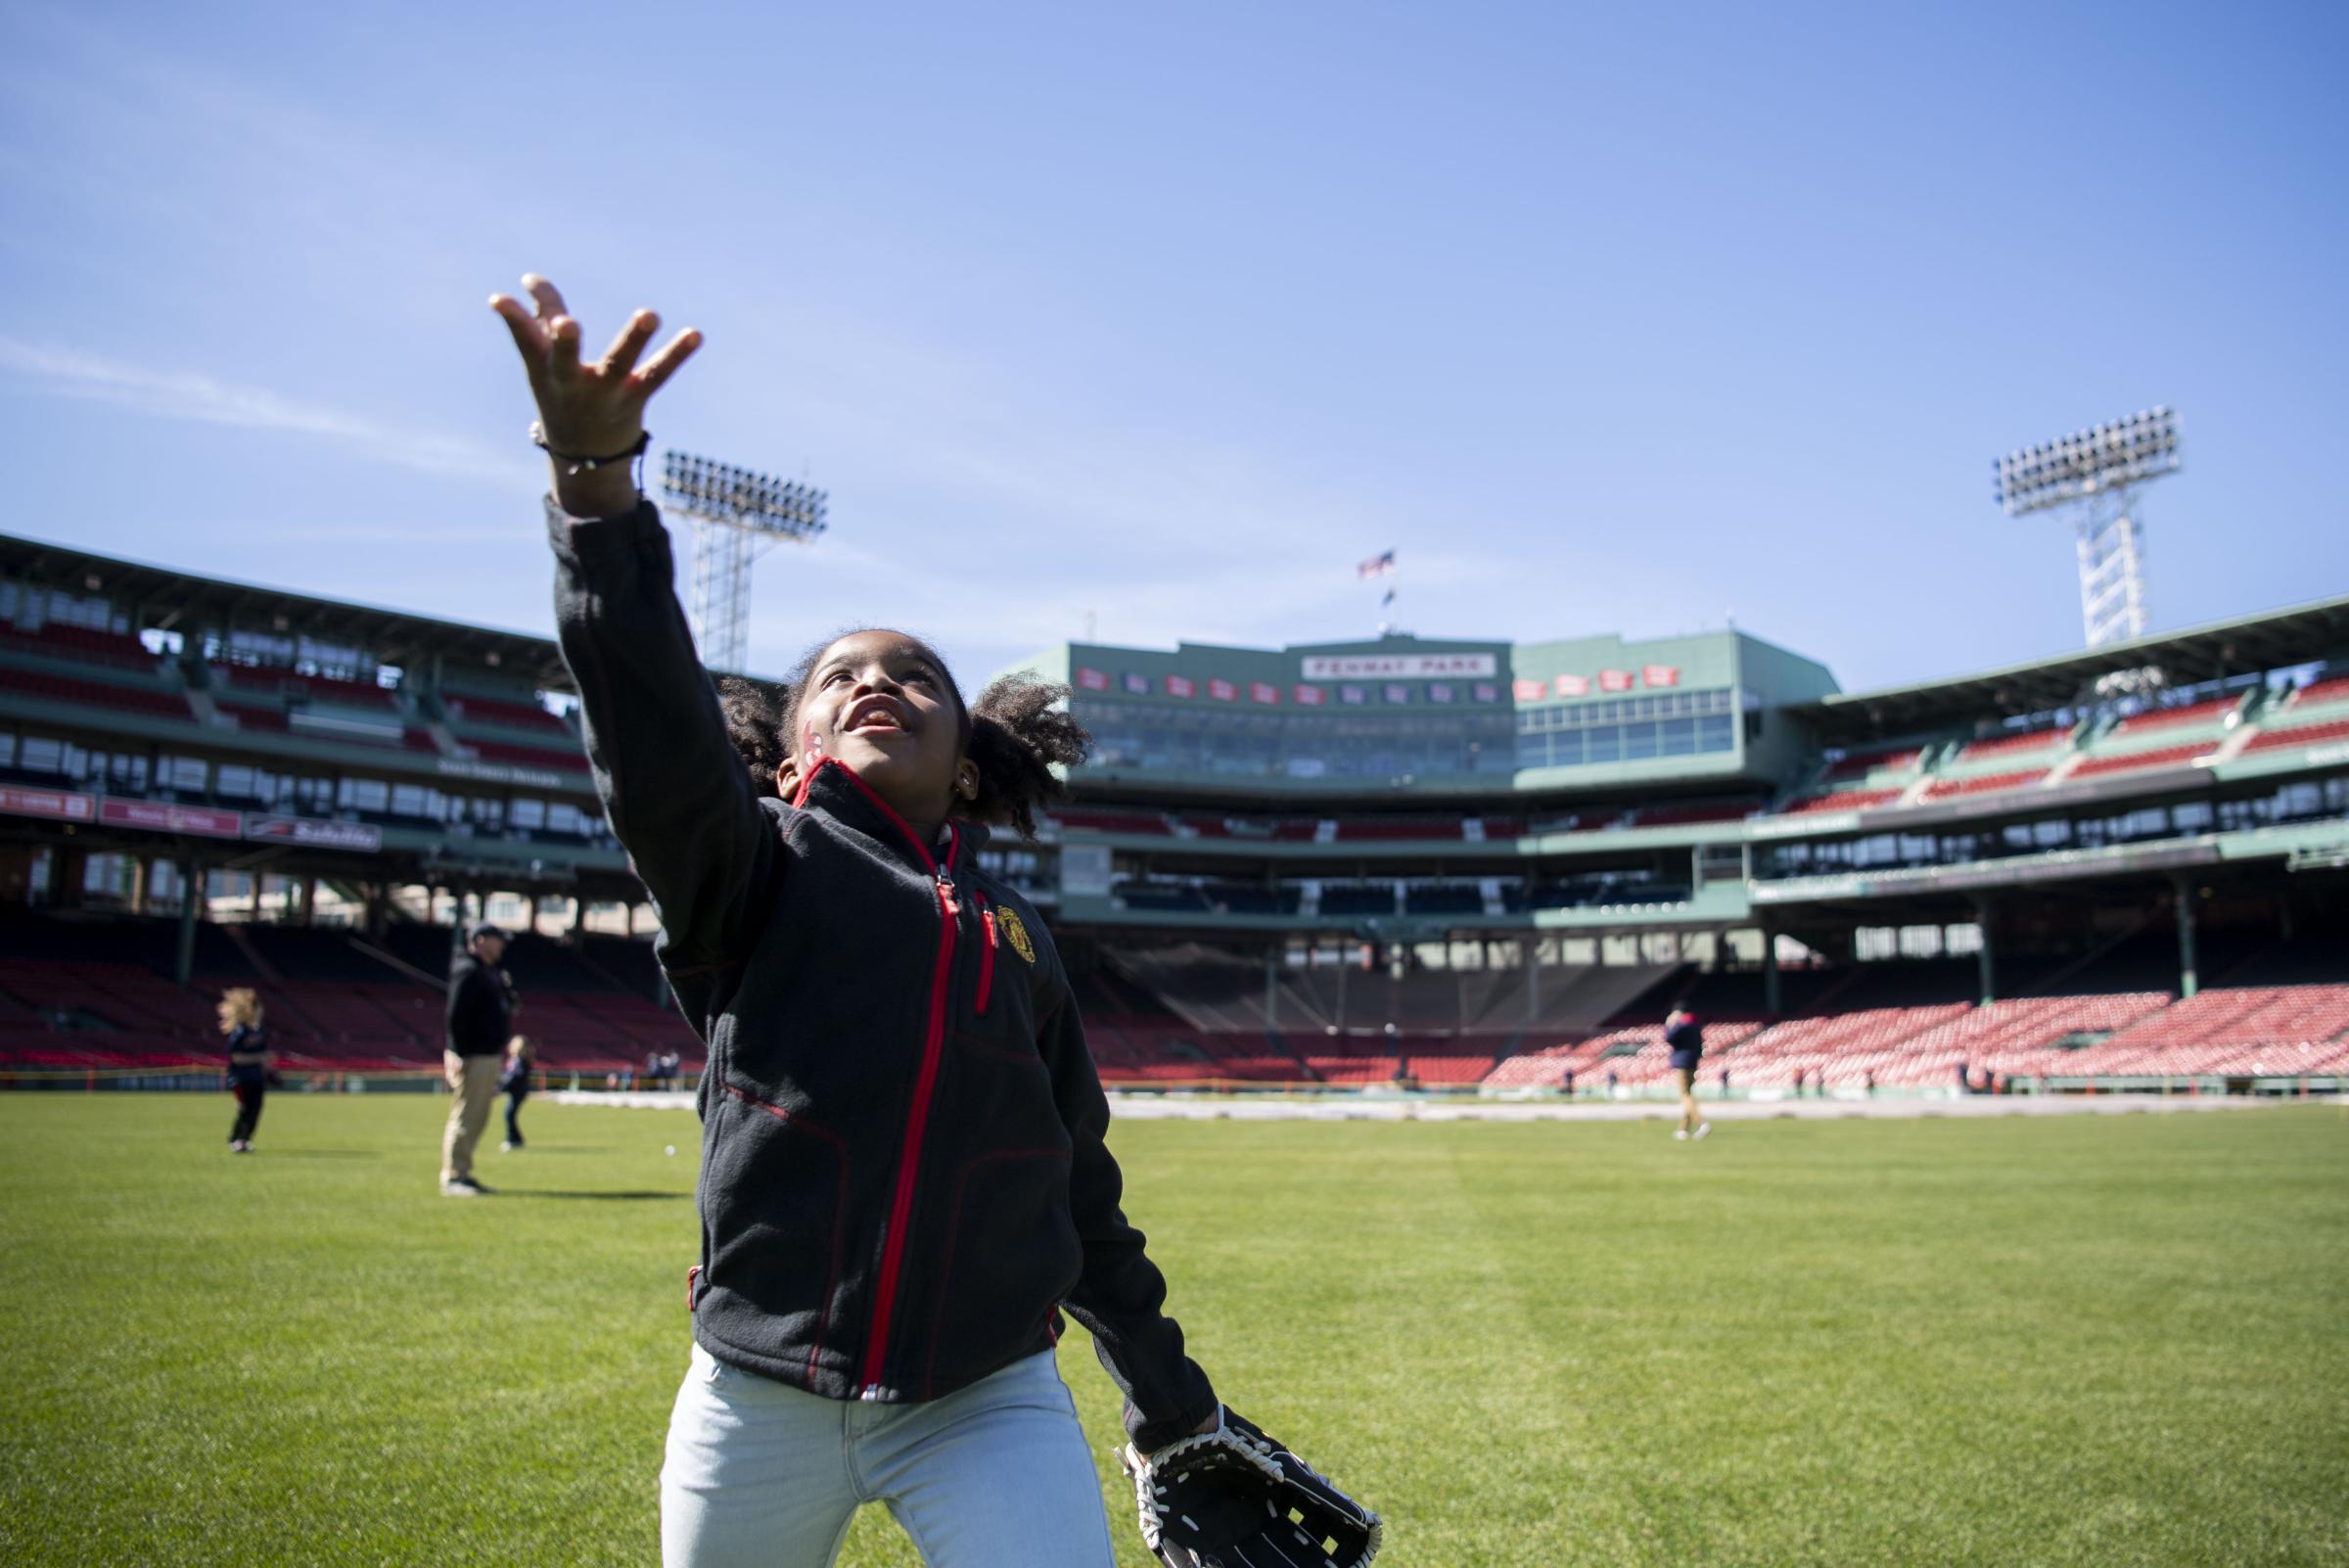 The 2023 Boston Red Sox  - April 8, 2023, Boston, MA: A kid plays in the outfield...